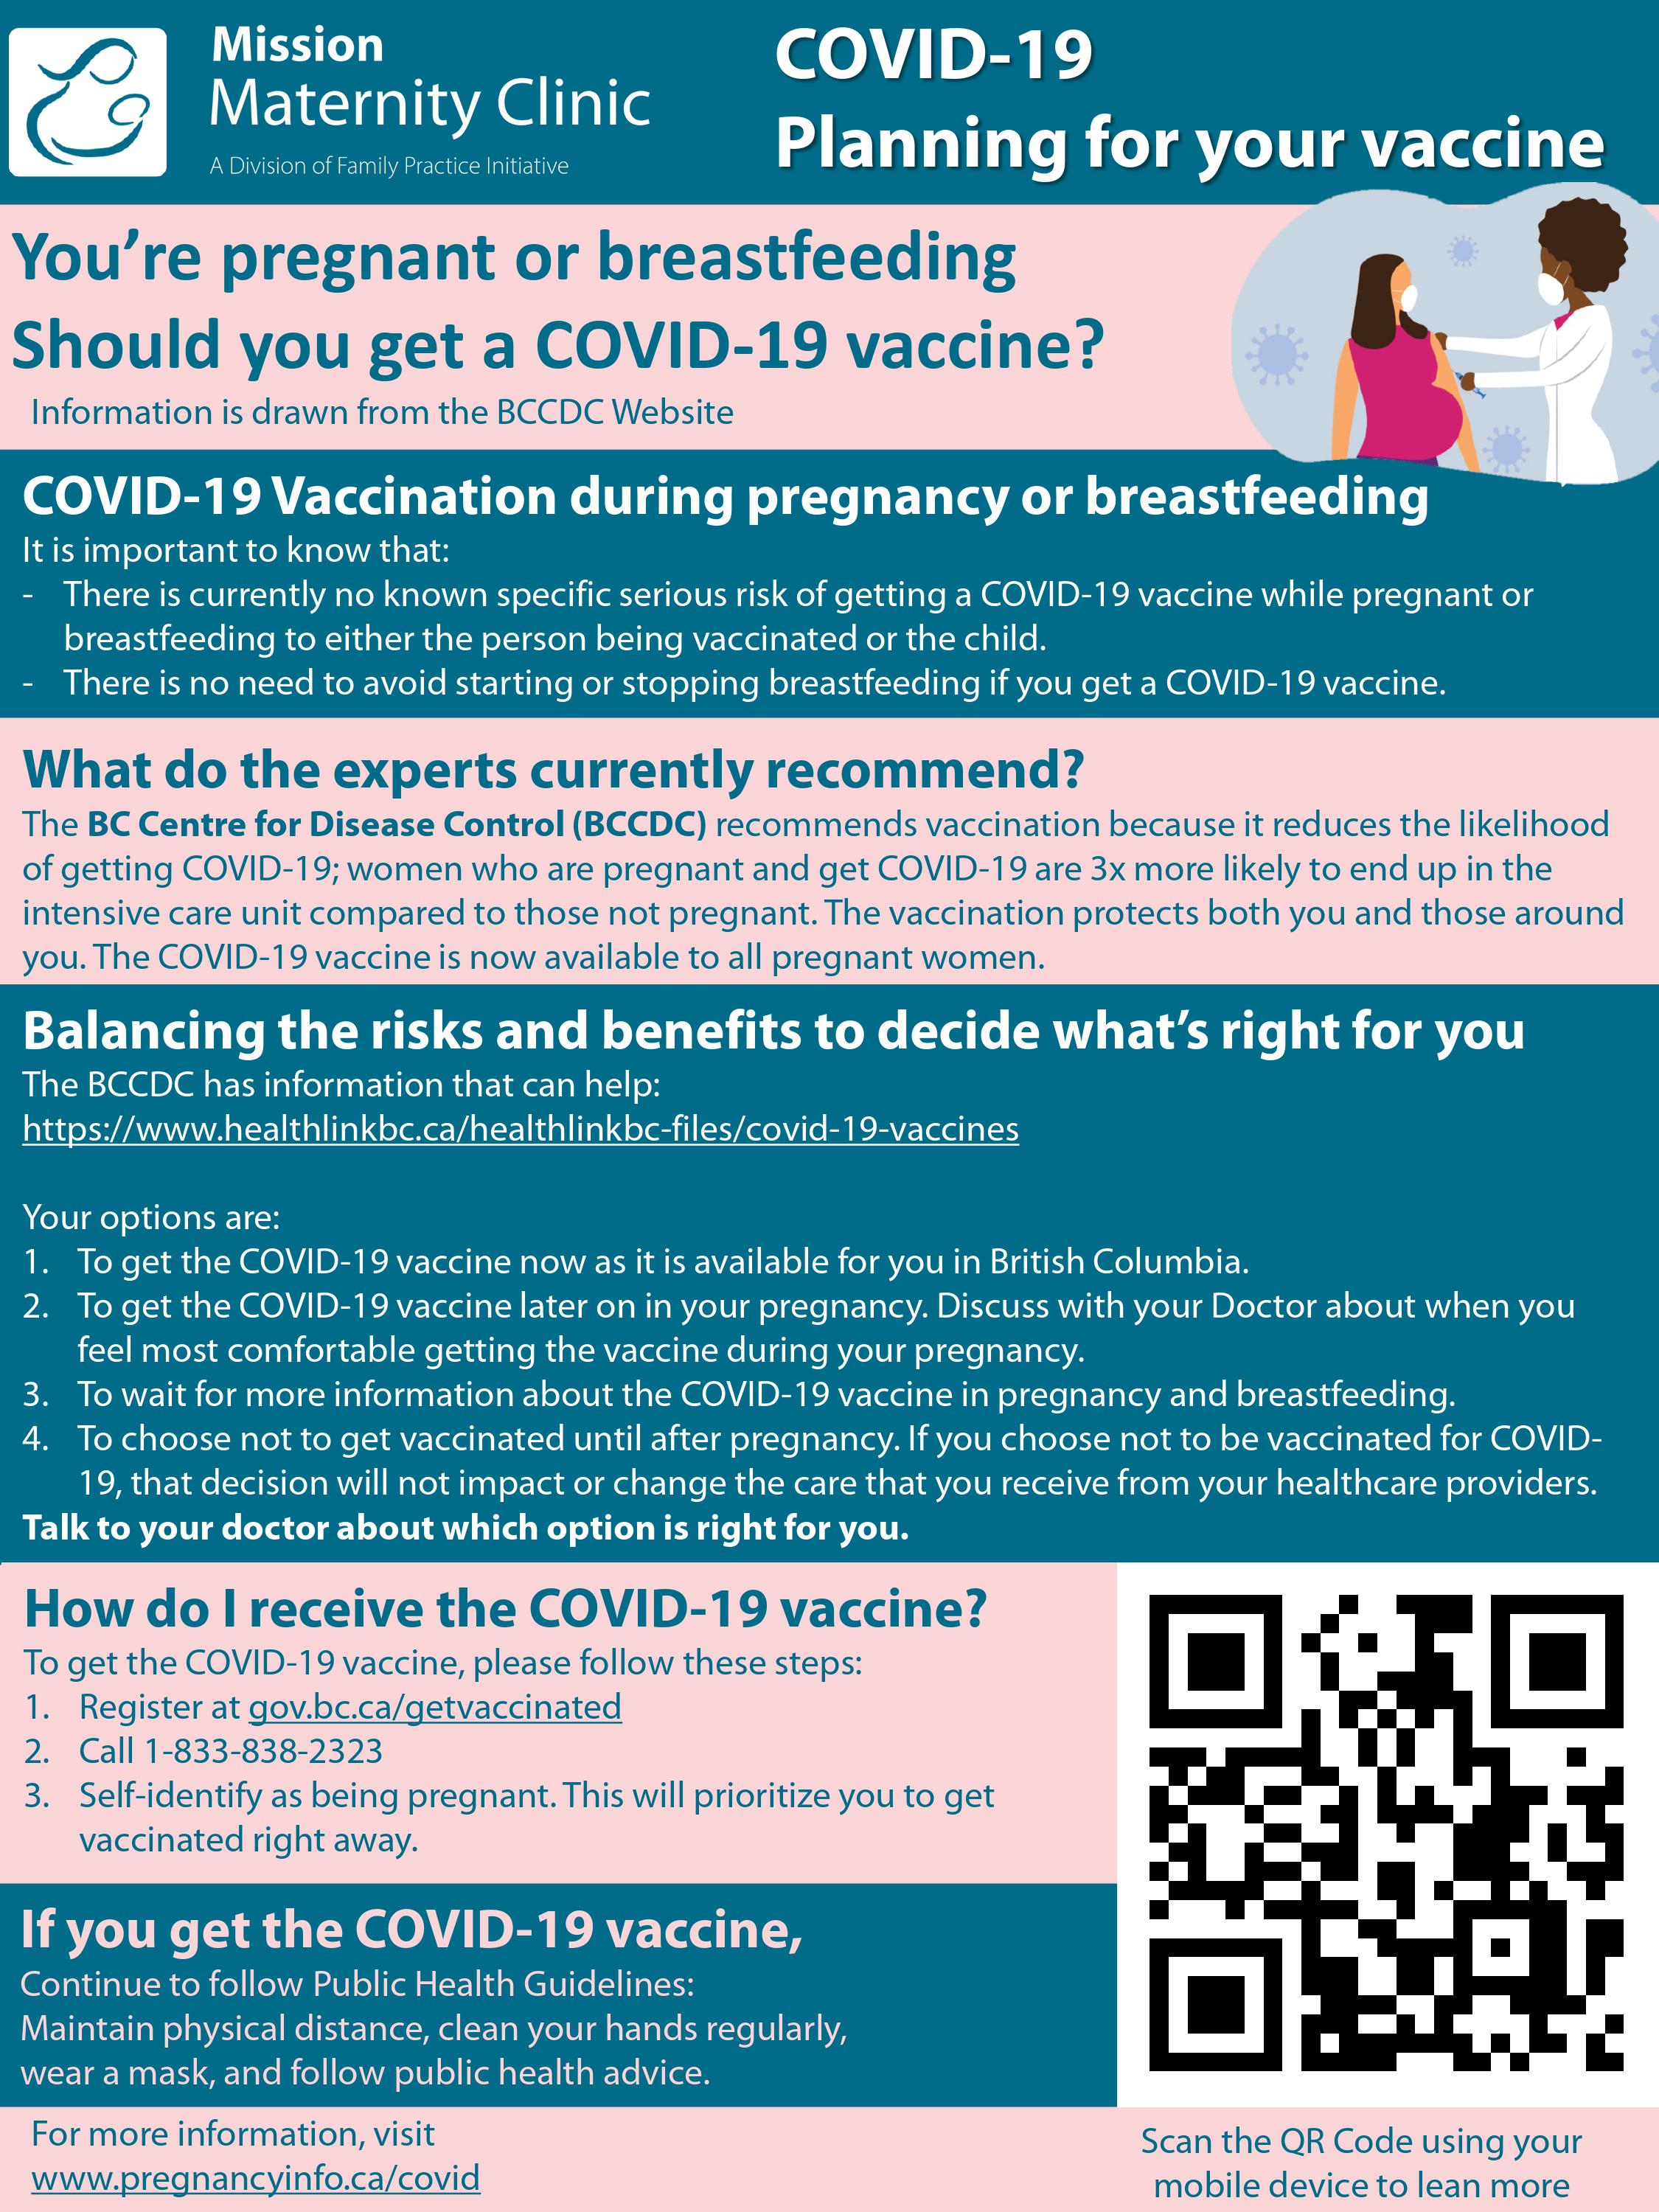 COVID-19 Planning for your vaccine - Pregnant & Breastfeeding-page-001_0.jpg